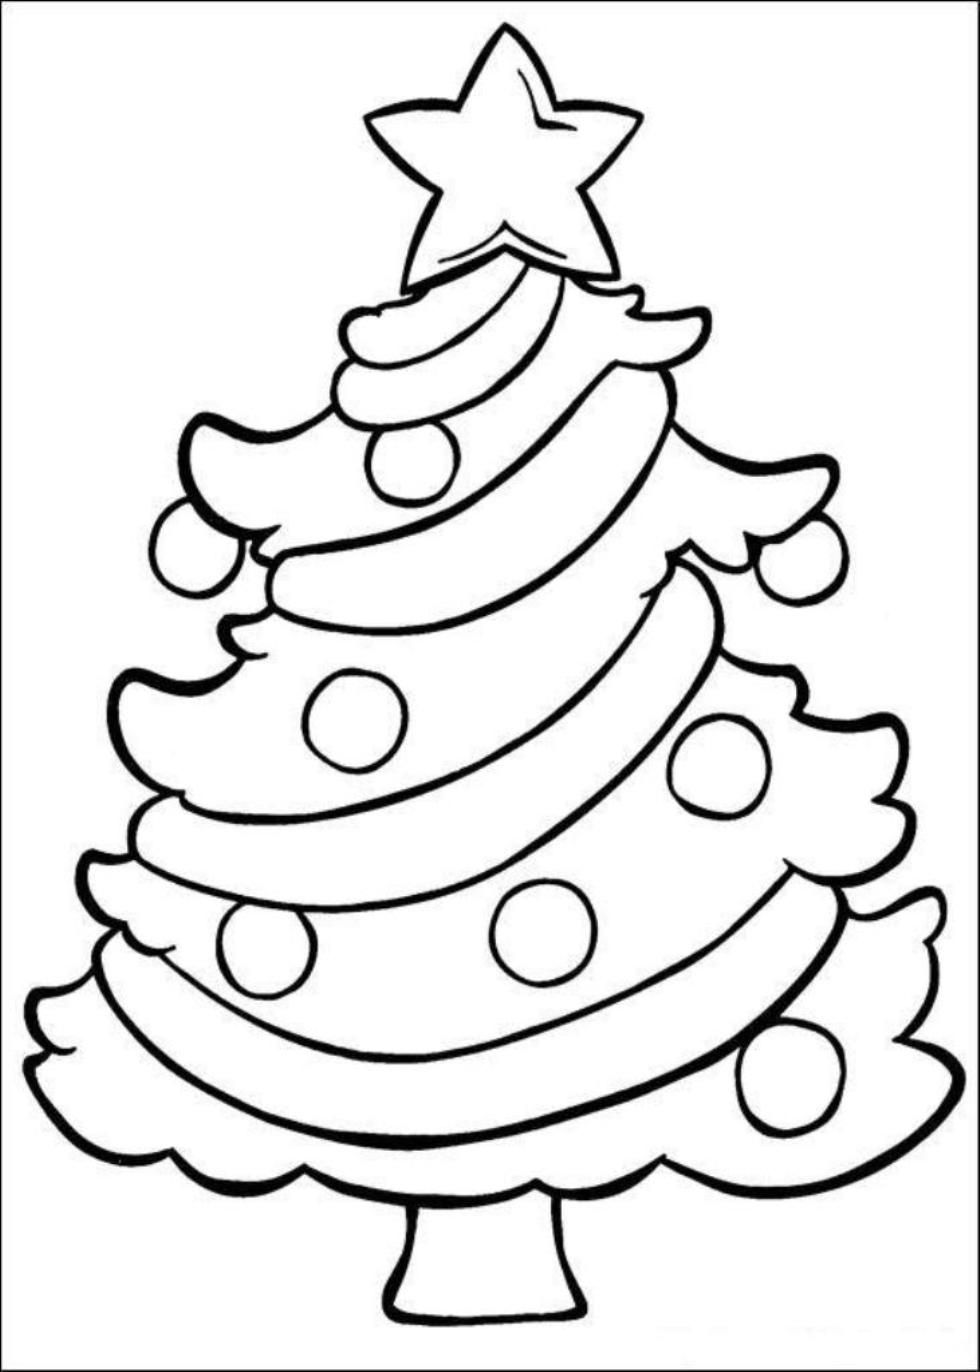  Christmas Coloring Pages To Print Out 1